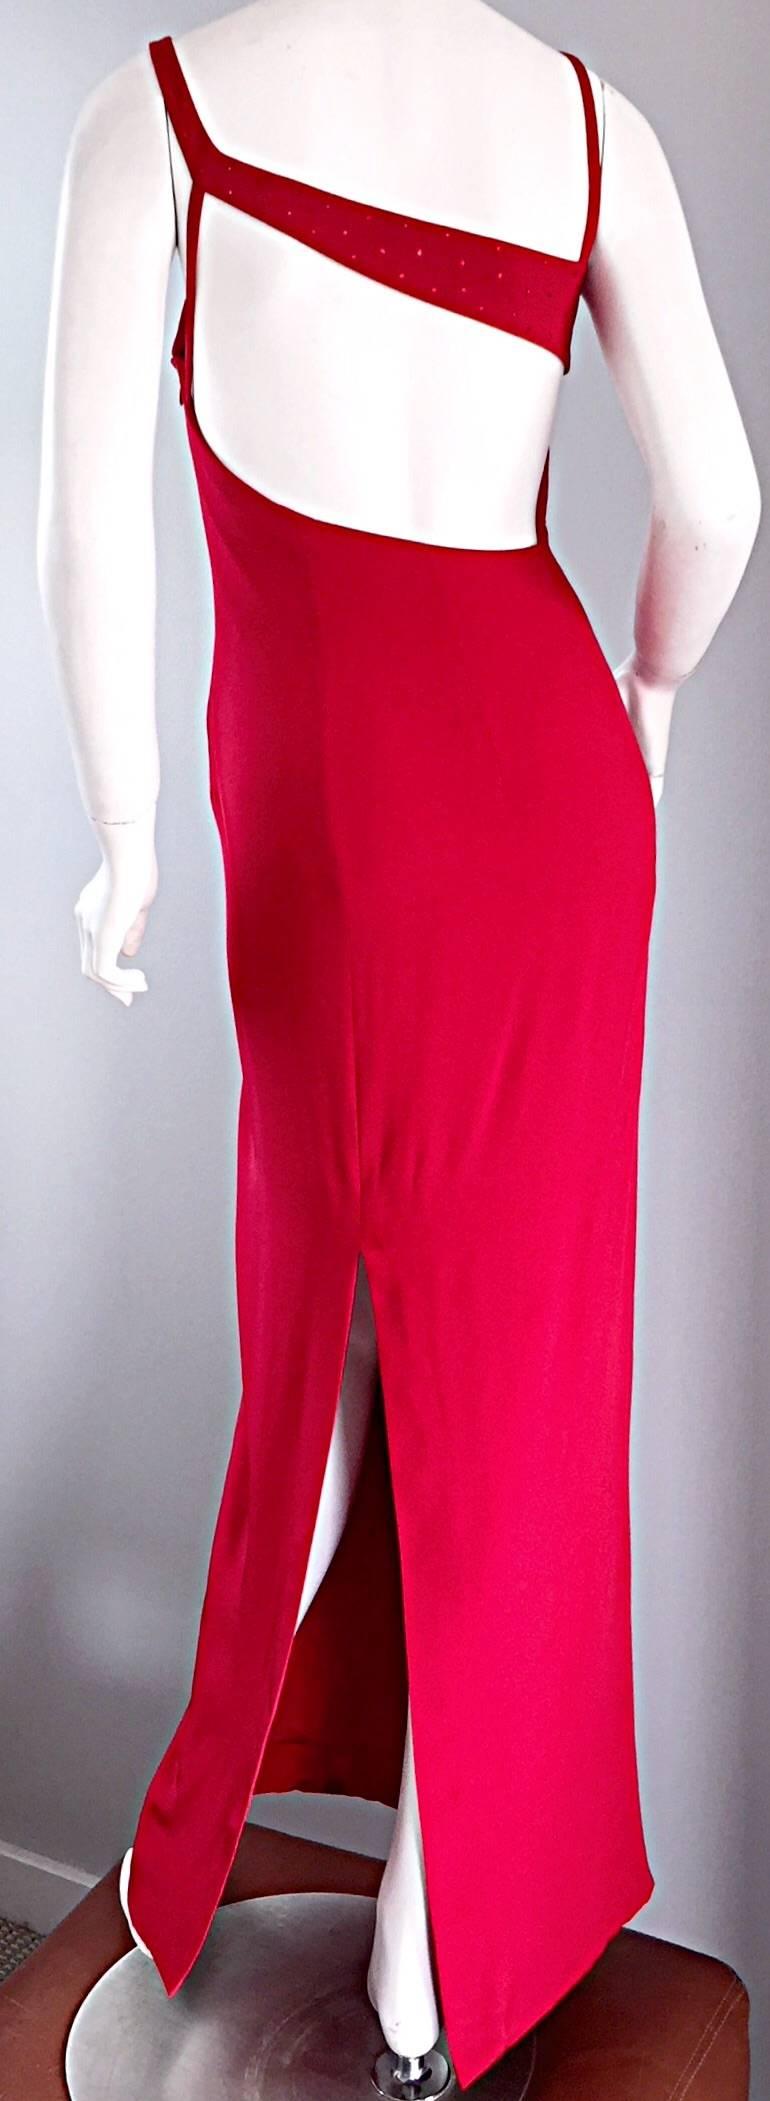 Sexiest 1990s Lane Davis of Beverly Hills red Avant Garde dress! AMAZING cut, that looks to die for on! Lipstick red, with matching red rhinestones throughout. Couture quality! Asymmetrical slit parallels fantastically with the cut-out back, and